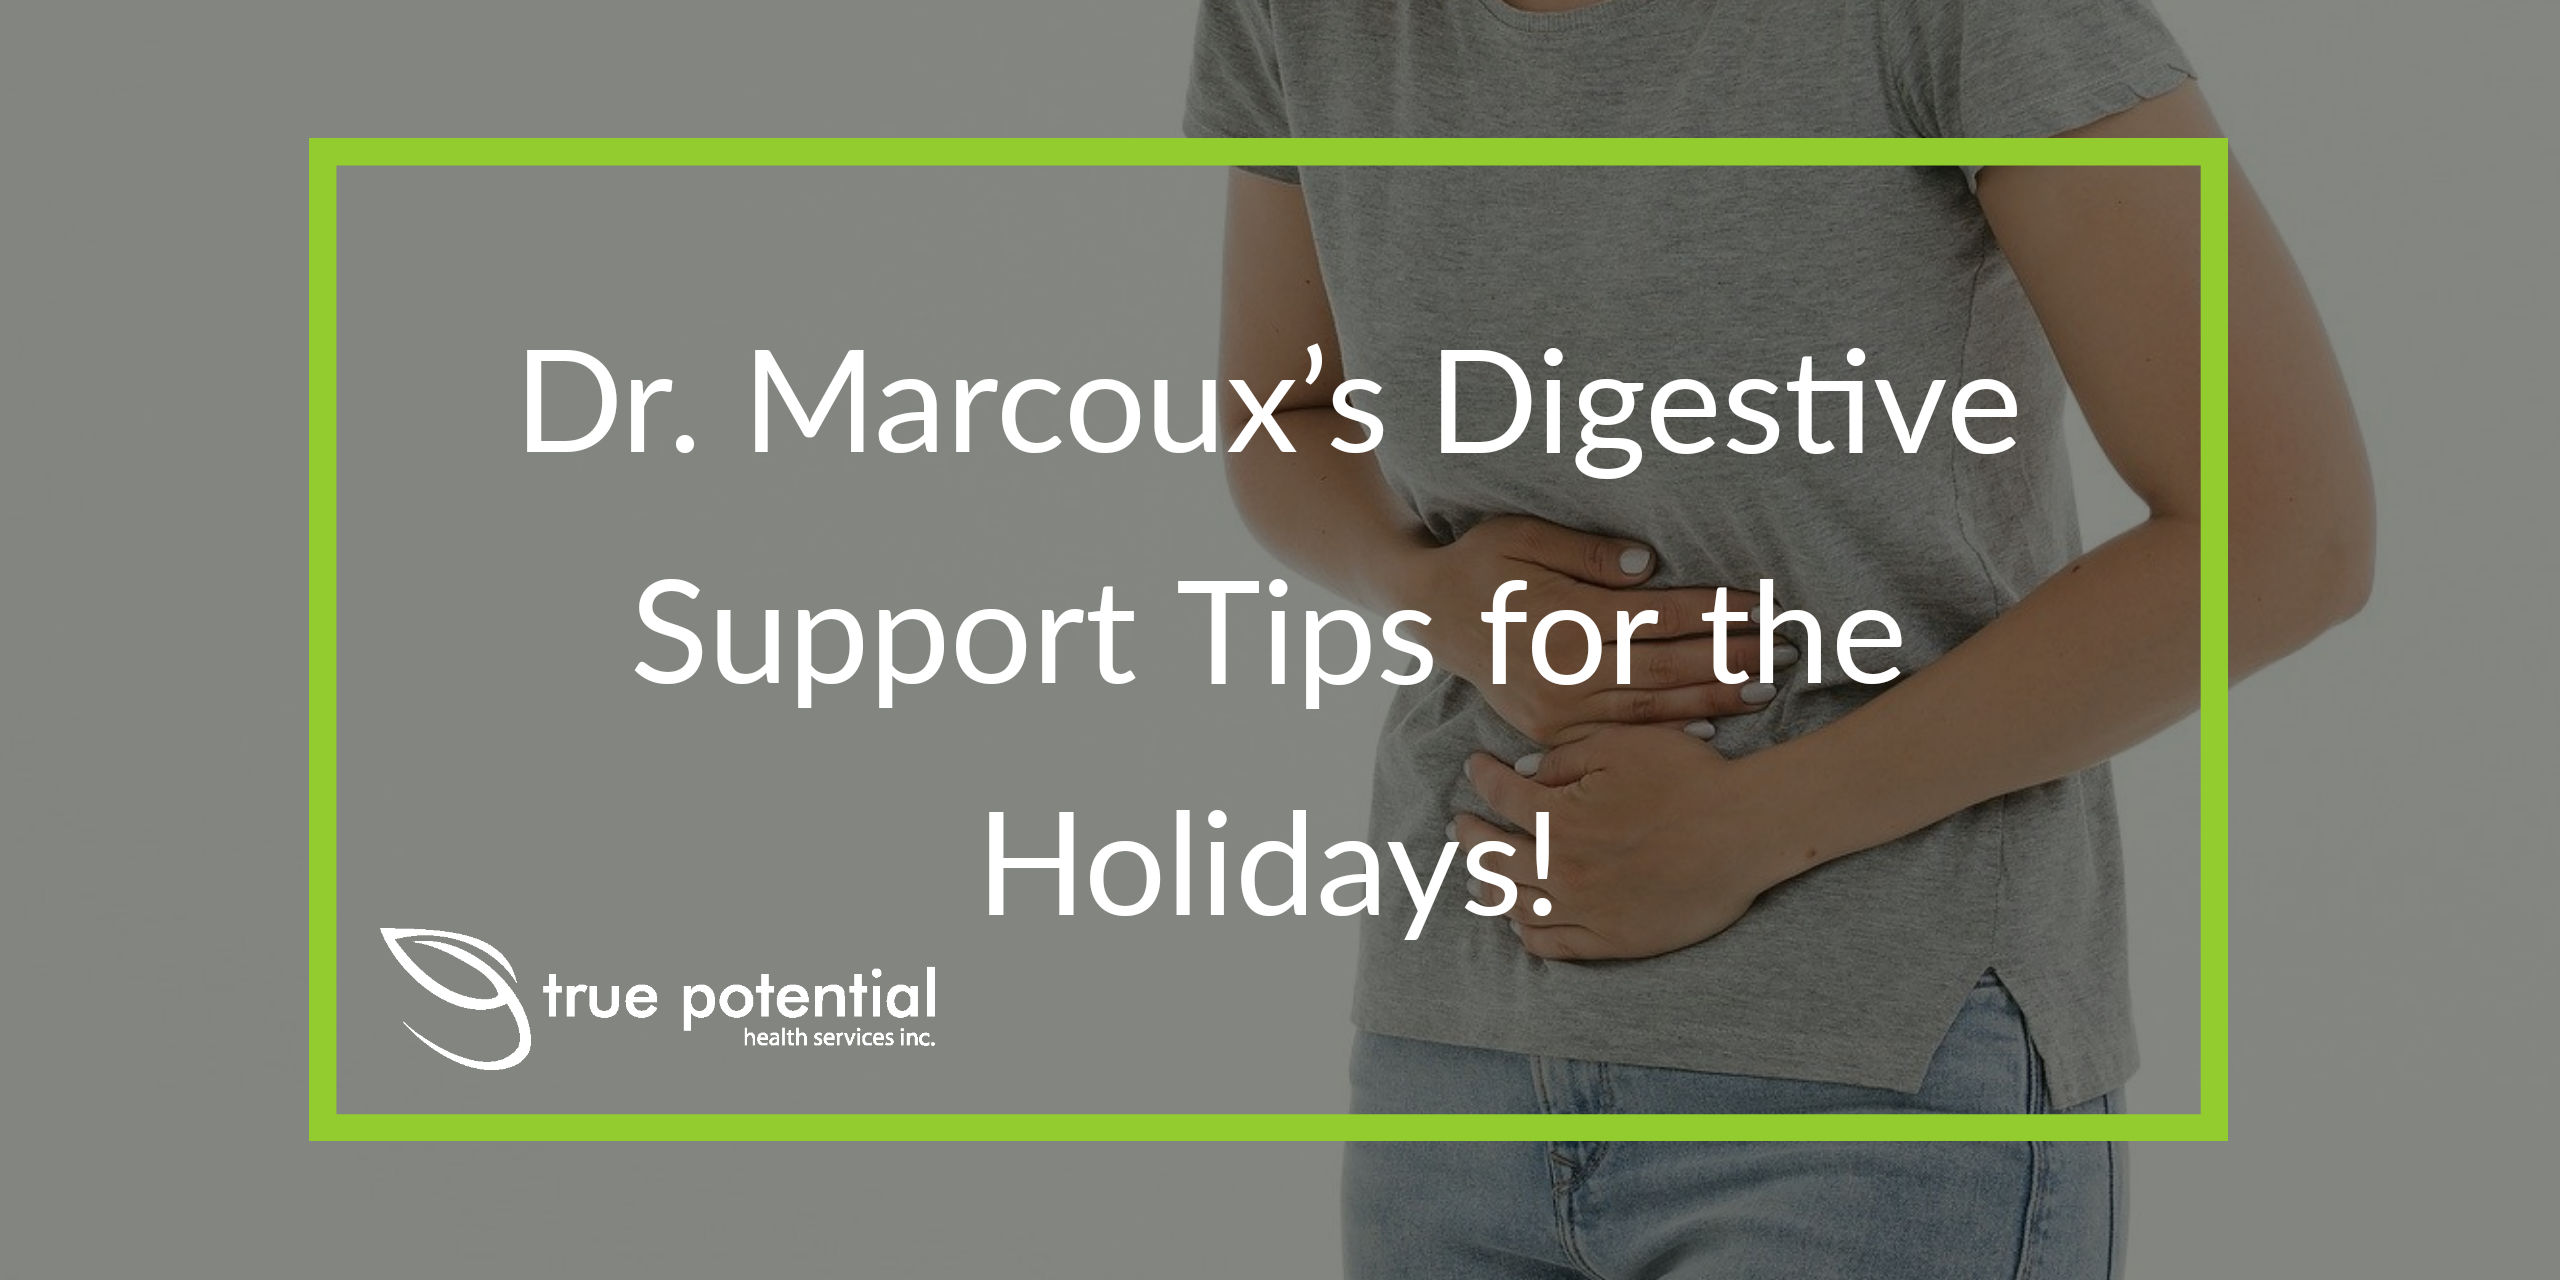 Digestive support tips